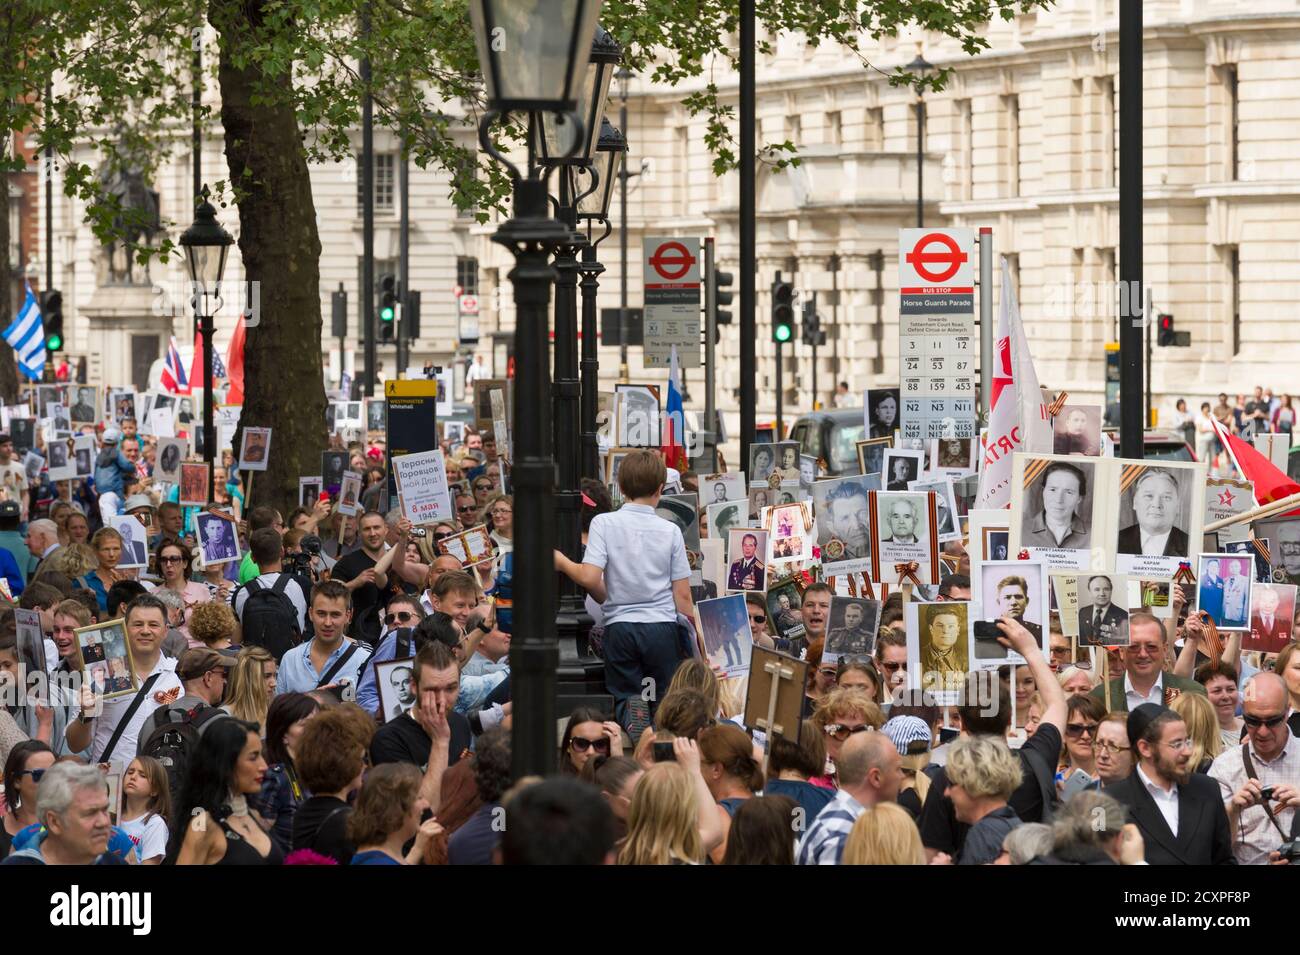 The London March of Immortal Regiment, the march is to commemorate Russian men and women who fought in WWII and are held across Russia and other countries on May 9th as part of the Victory Day celebrations. During the marches, people carry photographs of their relatives who participated in the war. Some 12 million people participated in the Immortal Regiment marches throughout Russia in 2015.  The London march started from the North Terrace of Trafalgar Square, just outside The National Gallery, the 'regiment' then walk to College Green via Whitehall, Downing Street, Parliament Square and West Stock Photo